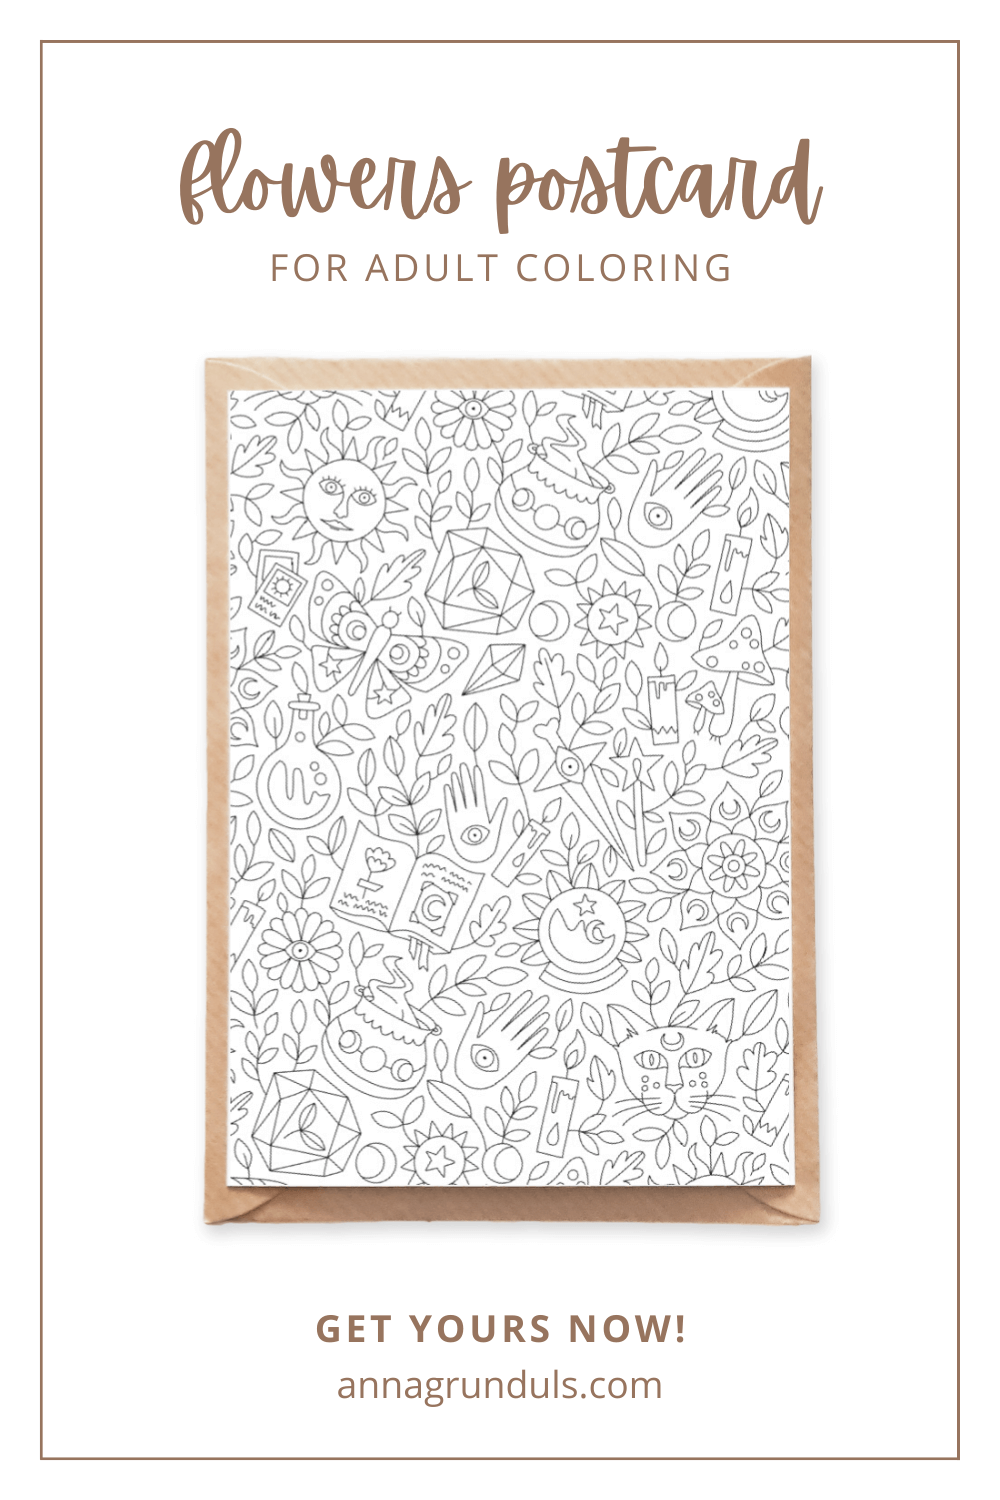 flowers pattern postcard for adult coloring pinterest pin